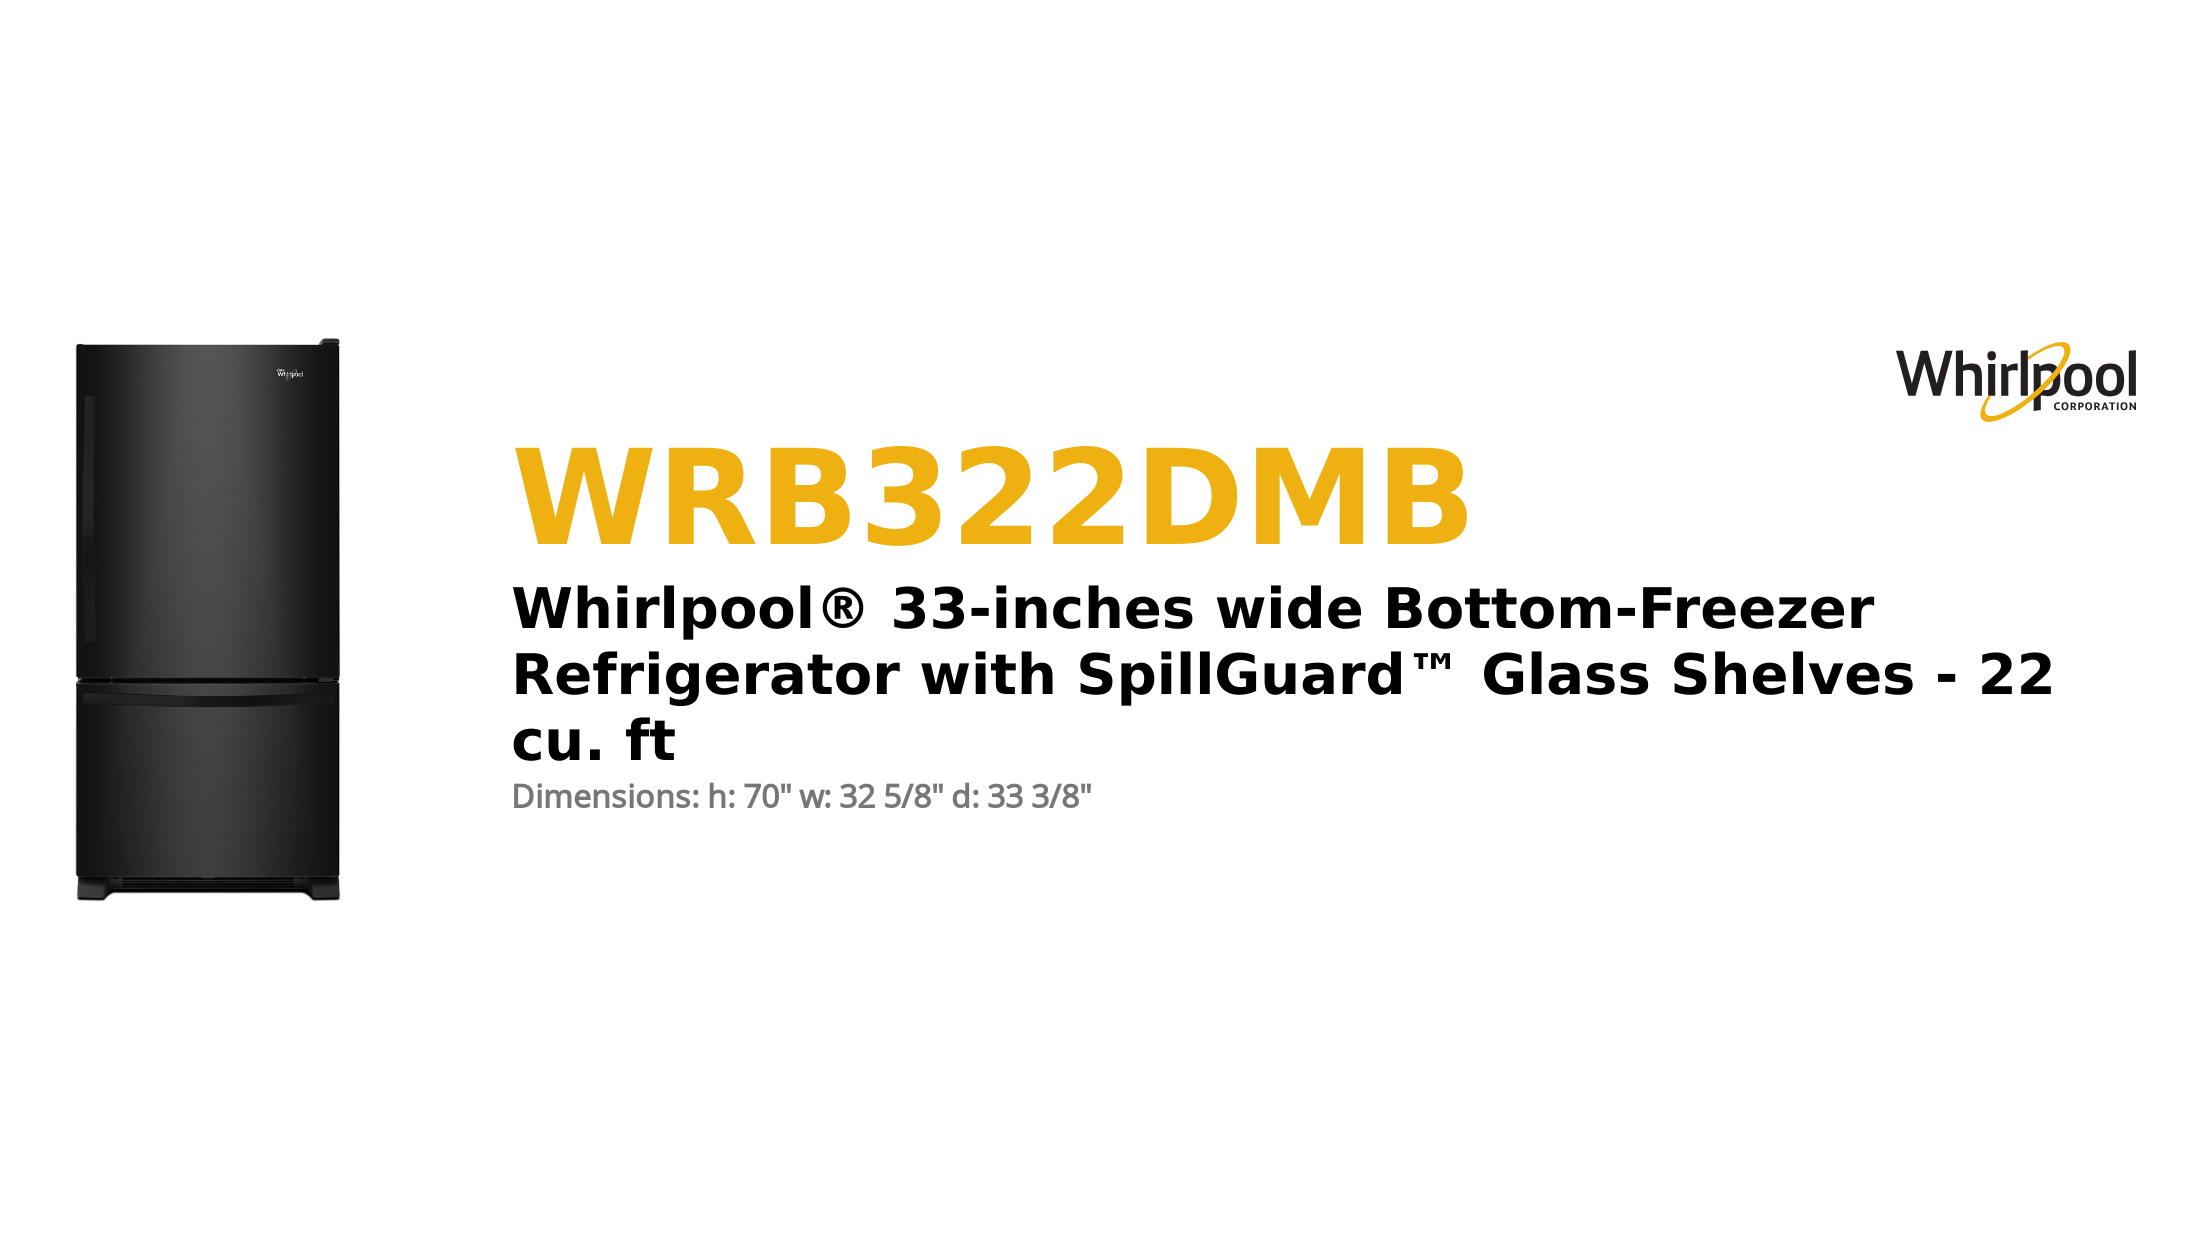 Whirlpool® 33-inches wide Bottom-Freezer Refrigerator with SpillGuard™ Glass Shelves - 22 cu. ft